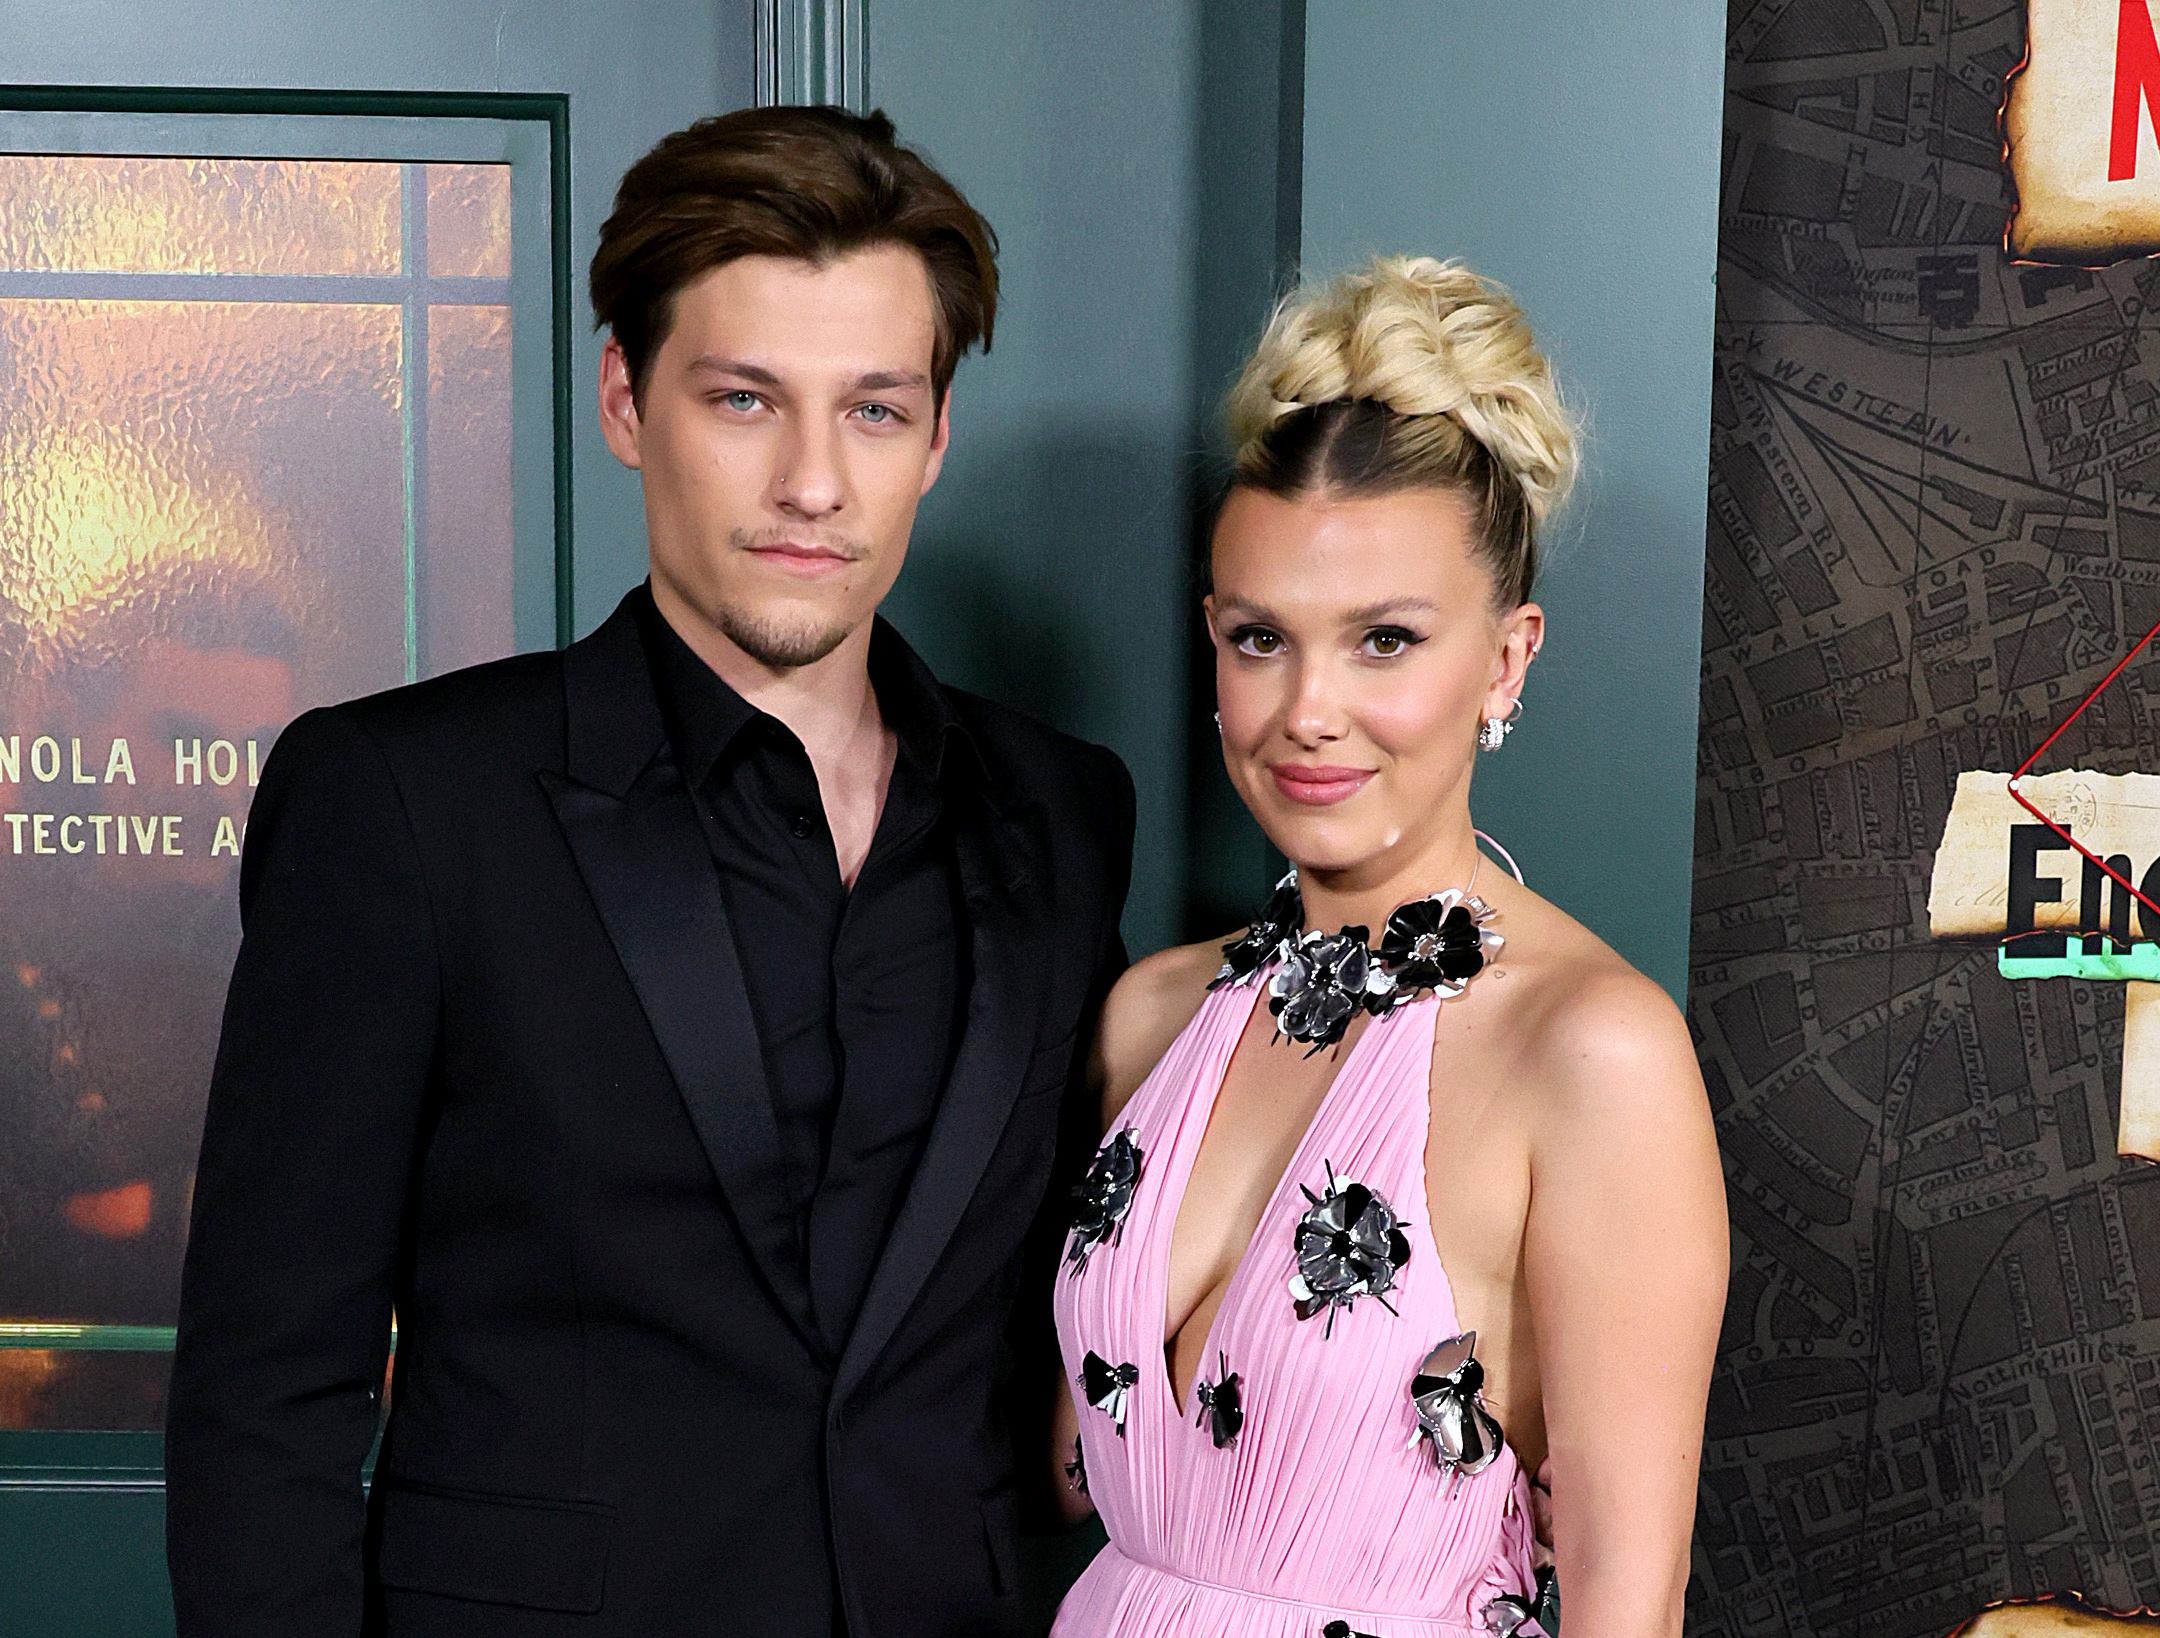 <p>Millie Bobby Brown started dating Jake Bongiovi -- the son of rock star Jon Bon Jovi -- in 2021 when they were in their late teens. "We met on Instagram," the "Stranger Things" and "Enola Holmes" actress revealed in a Wired Autocomplete Interview in November 2022, explaining, "we were friends for a bit, and then, what can I say?"</p>